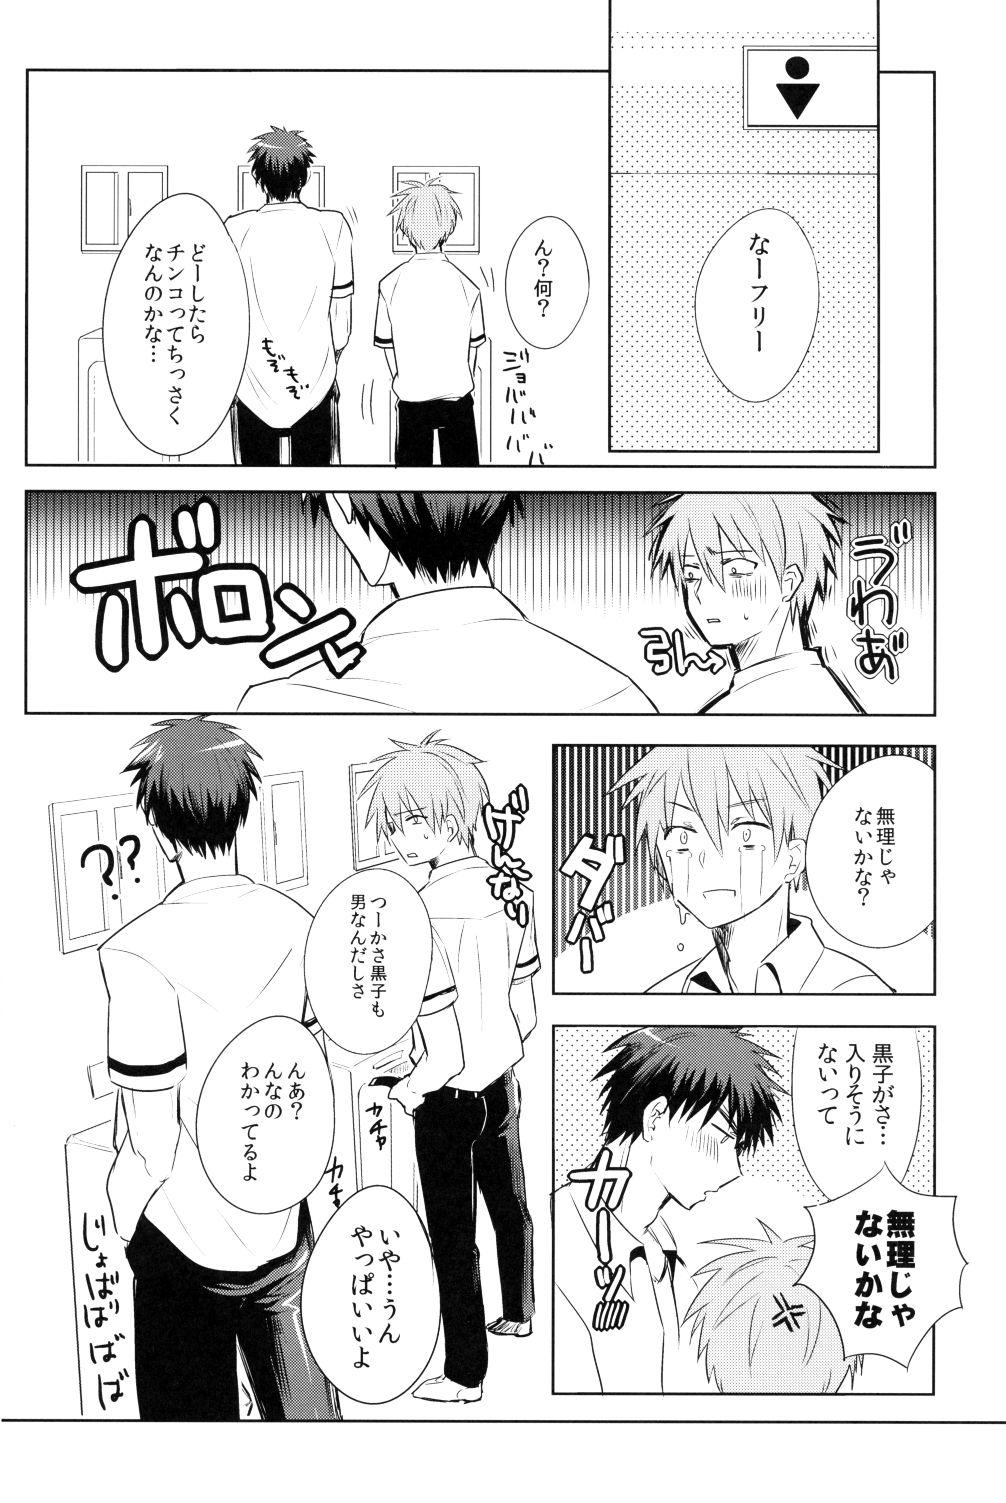 Kagami-kun's Thing is Amazing!! 8